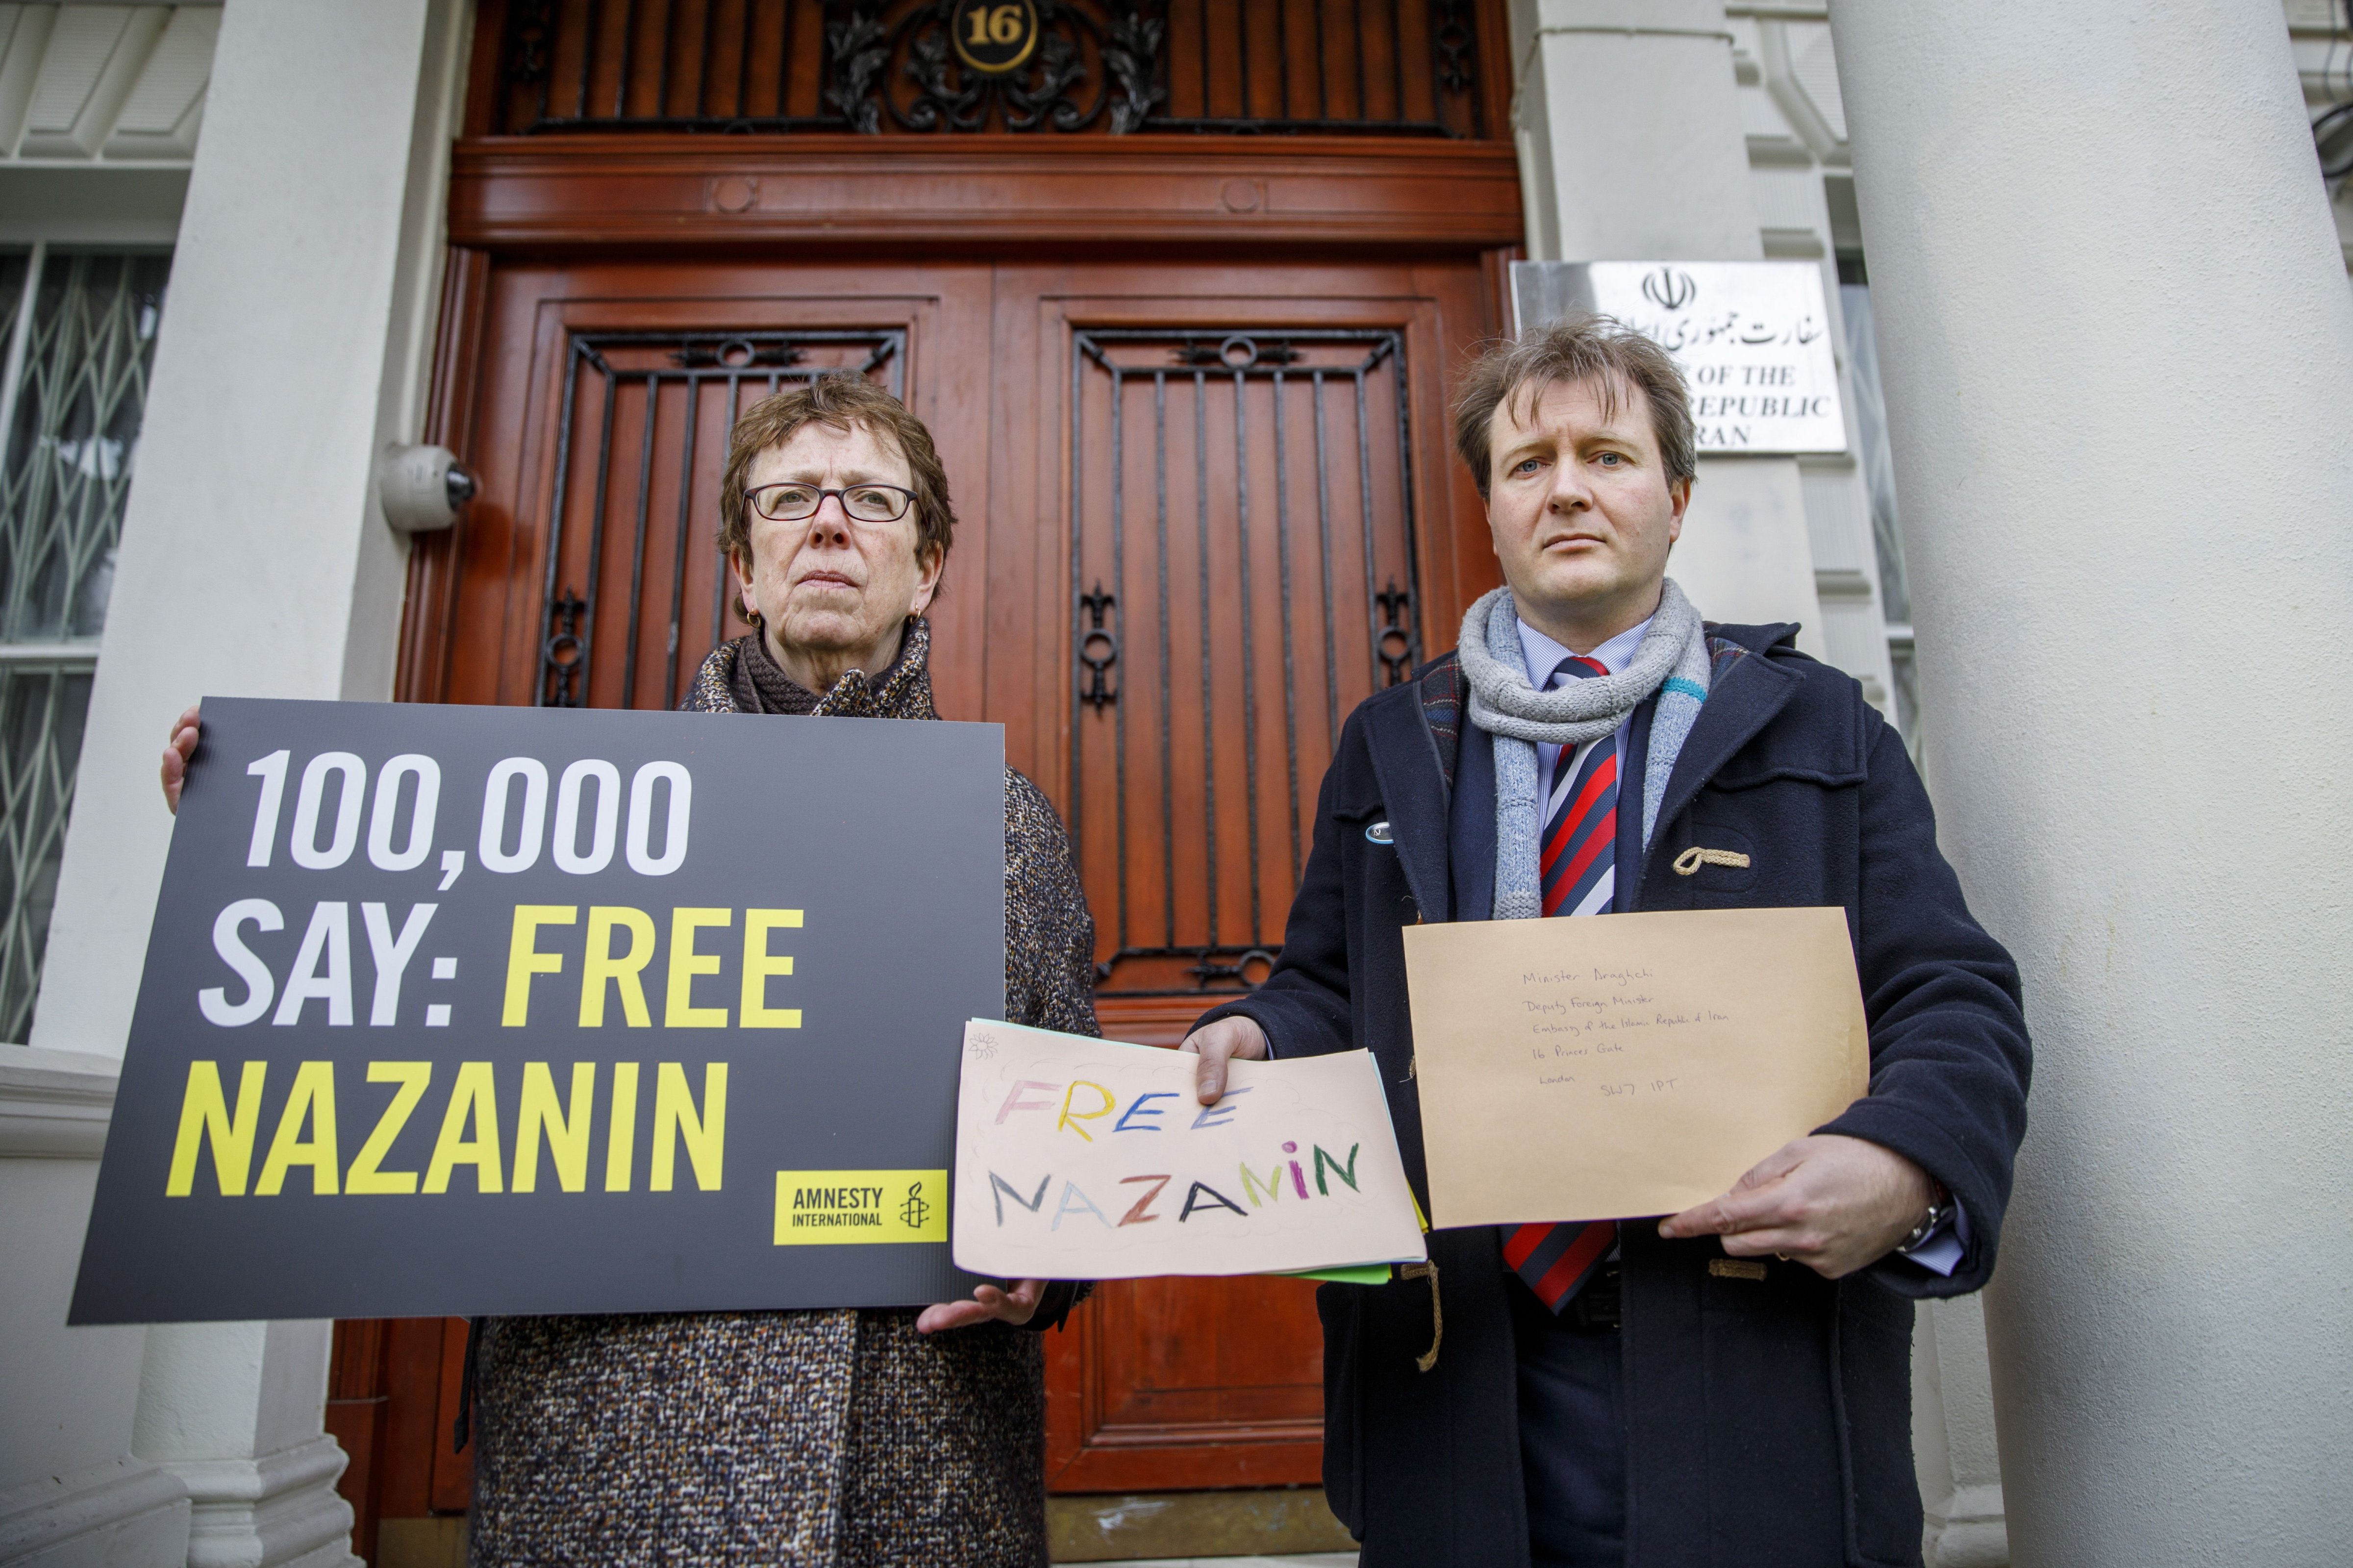 Richard Ratcliffe, (R), husband of jailed British-Iranian woman Nazanin Zaghari-Ratcliffe, delivers a petition and a letter to demand her release, at the Iranian Embassy in London on Feb. 21, 2018. (TOLGA AKMEN&mdash;AFP/Getty Images)